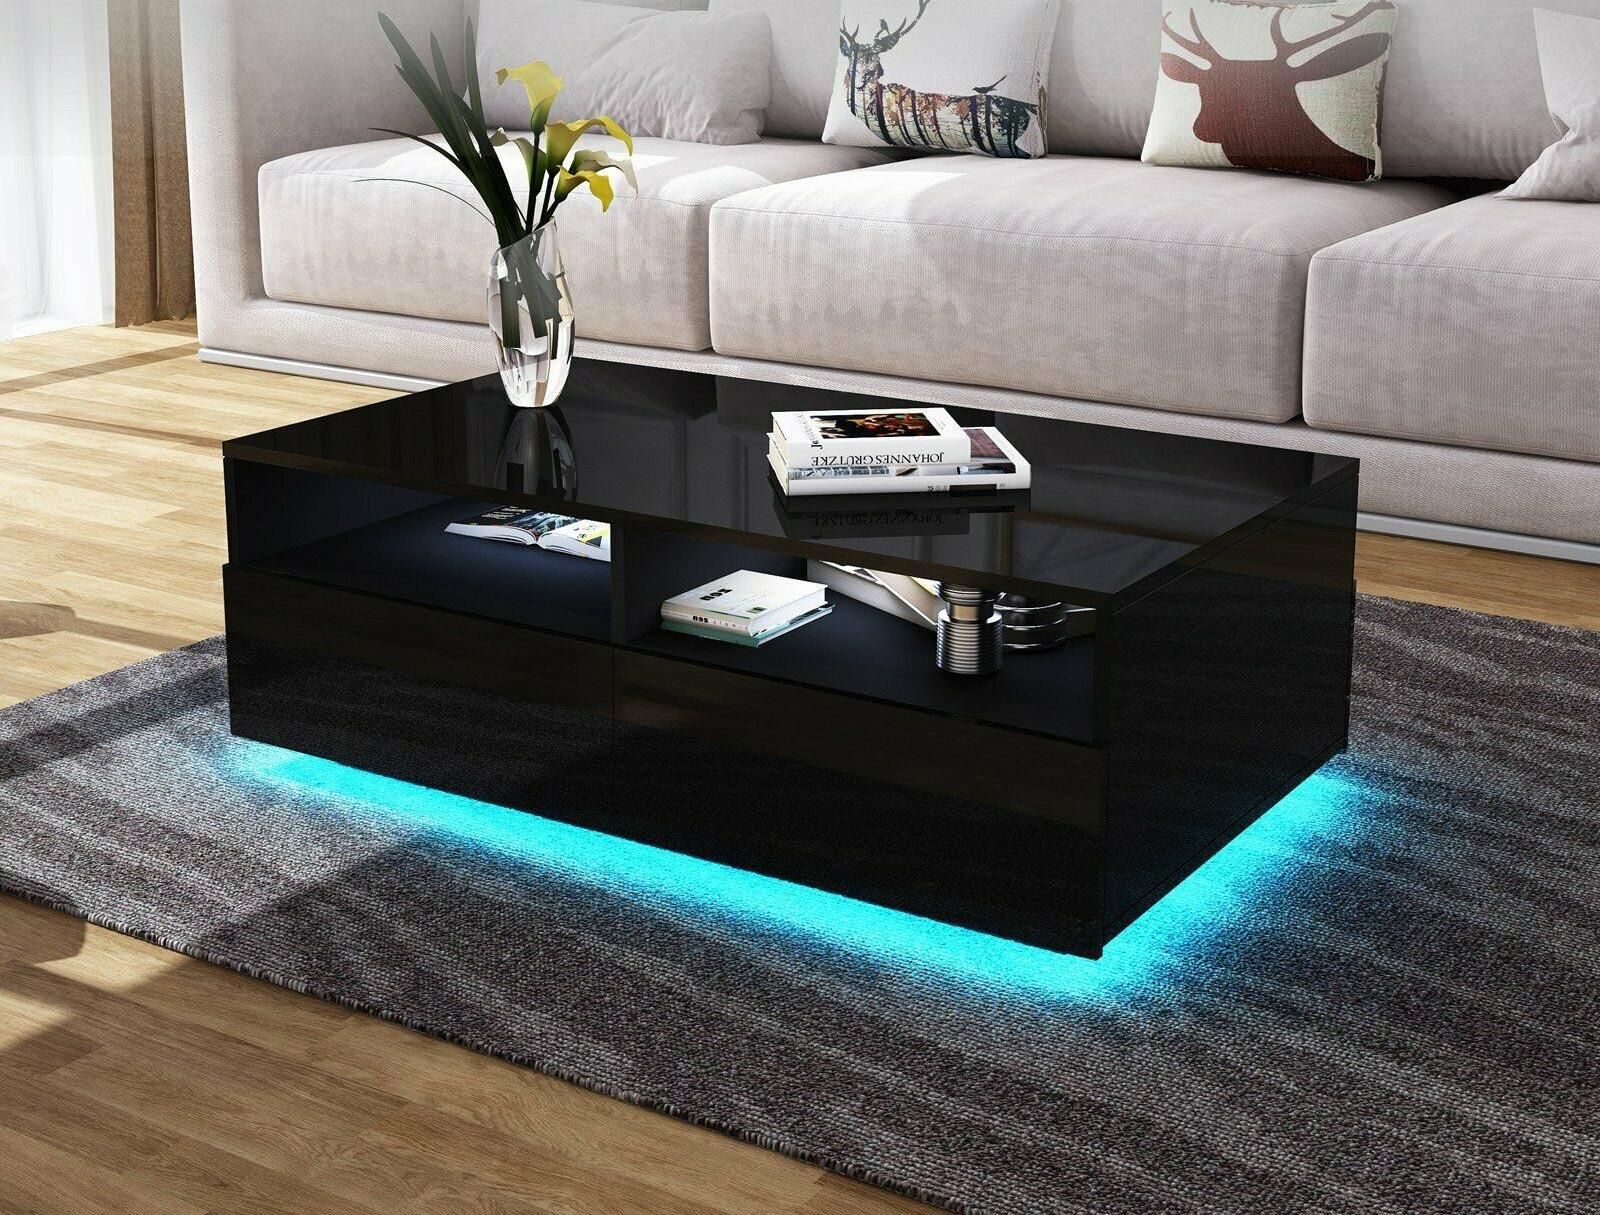 Living Room Rectangle Coffee Table 4 Drawers Rgb 16 Color Led Lights | Ebay Regarding Coffee Tables With Led Lights (View 14 of 20)